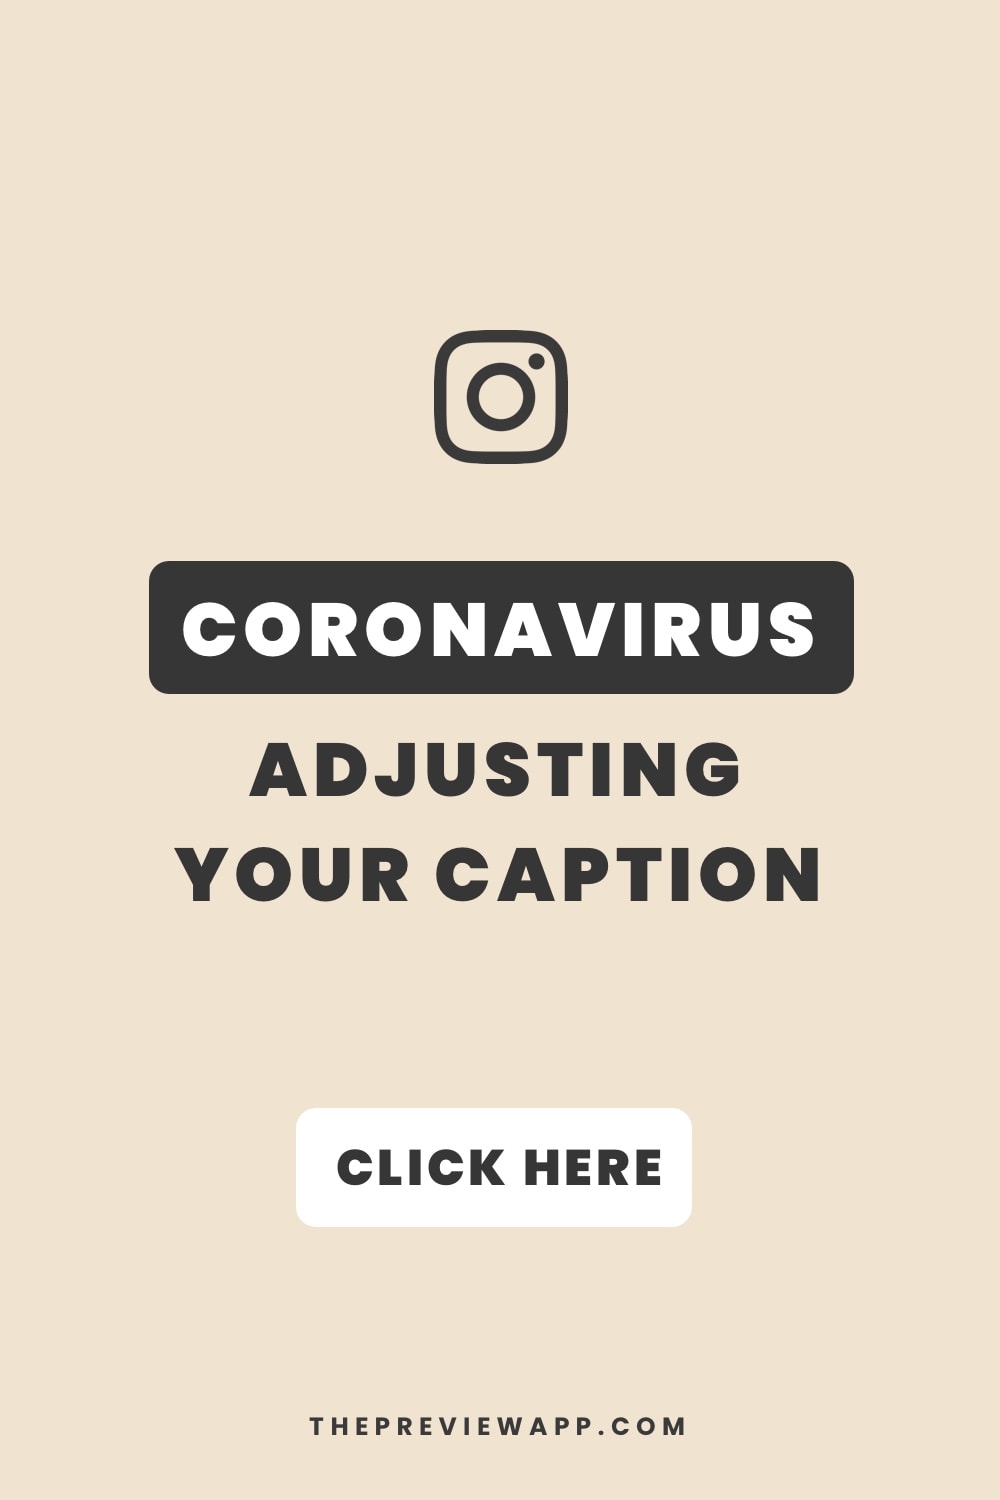 What To Post On Instagram During The Coronavirus